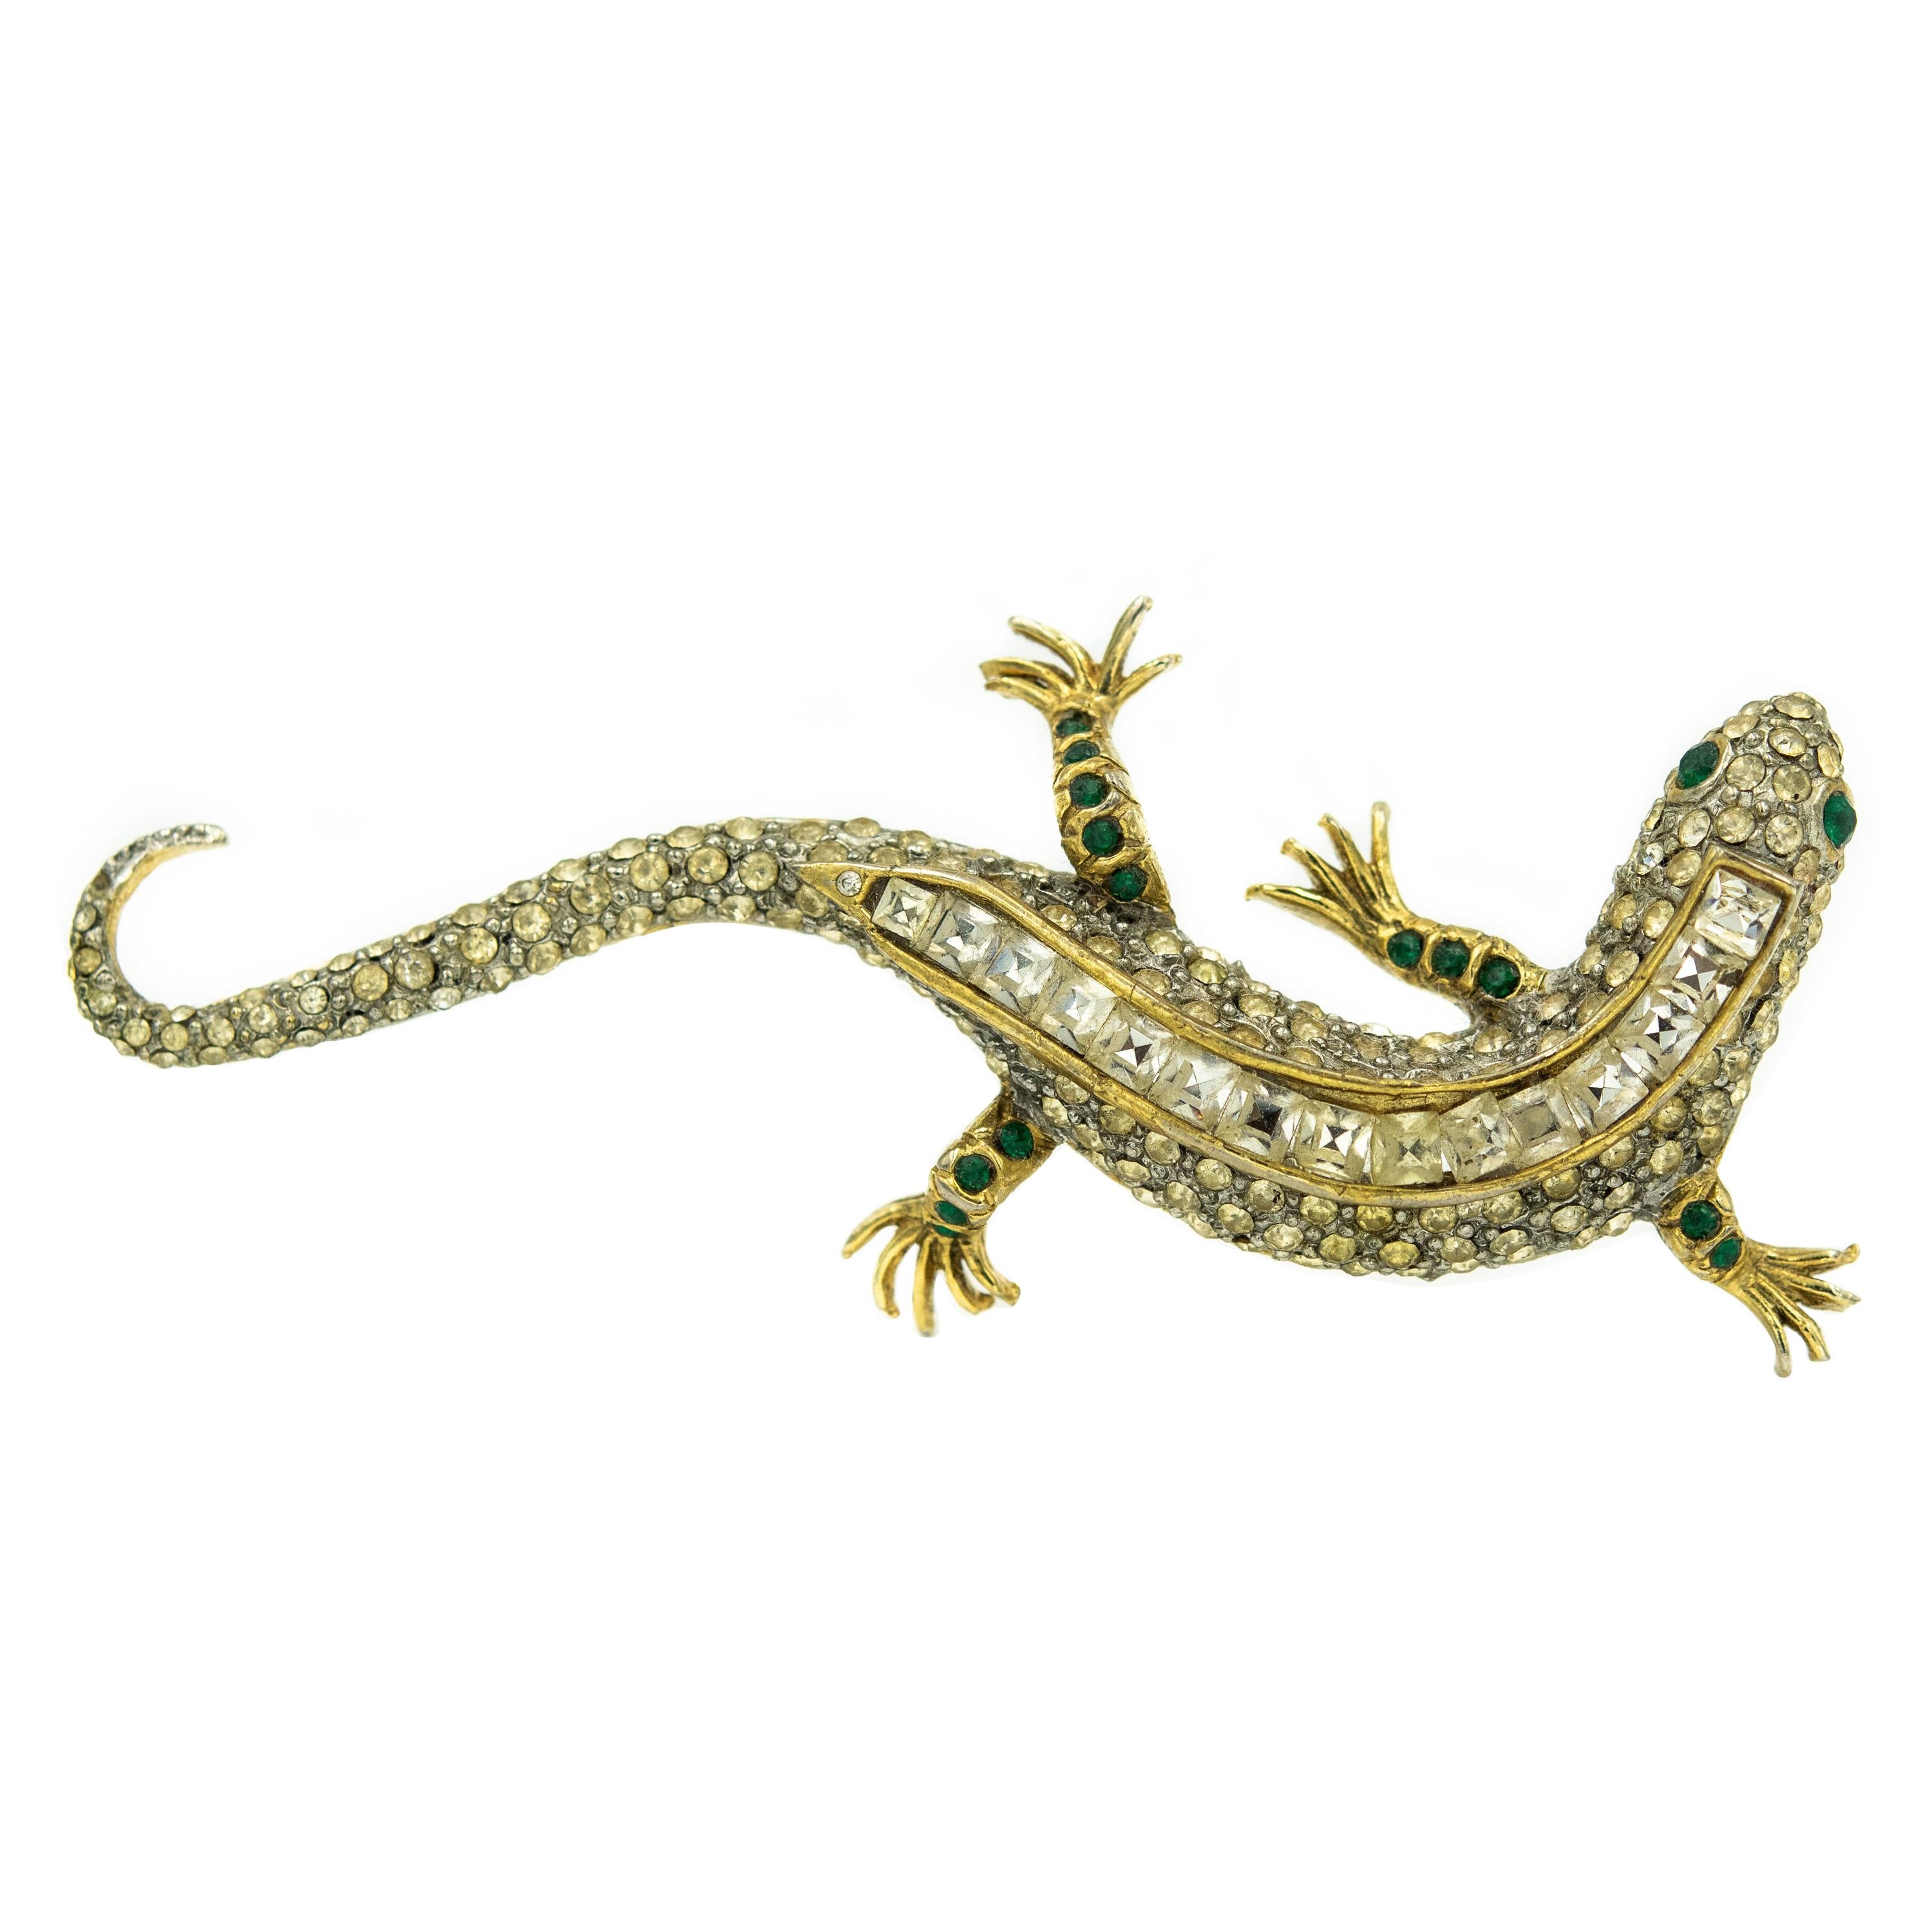 Large 4" Salamander Lizard Crystal Gold Plated Brooch by Maresco 1980s